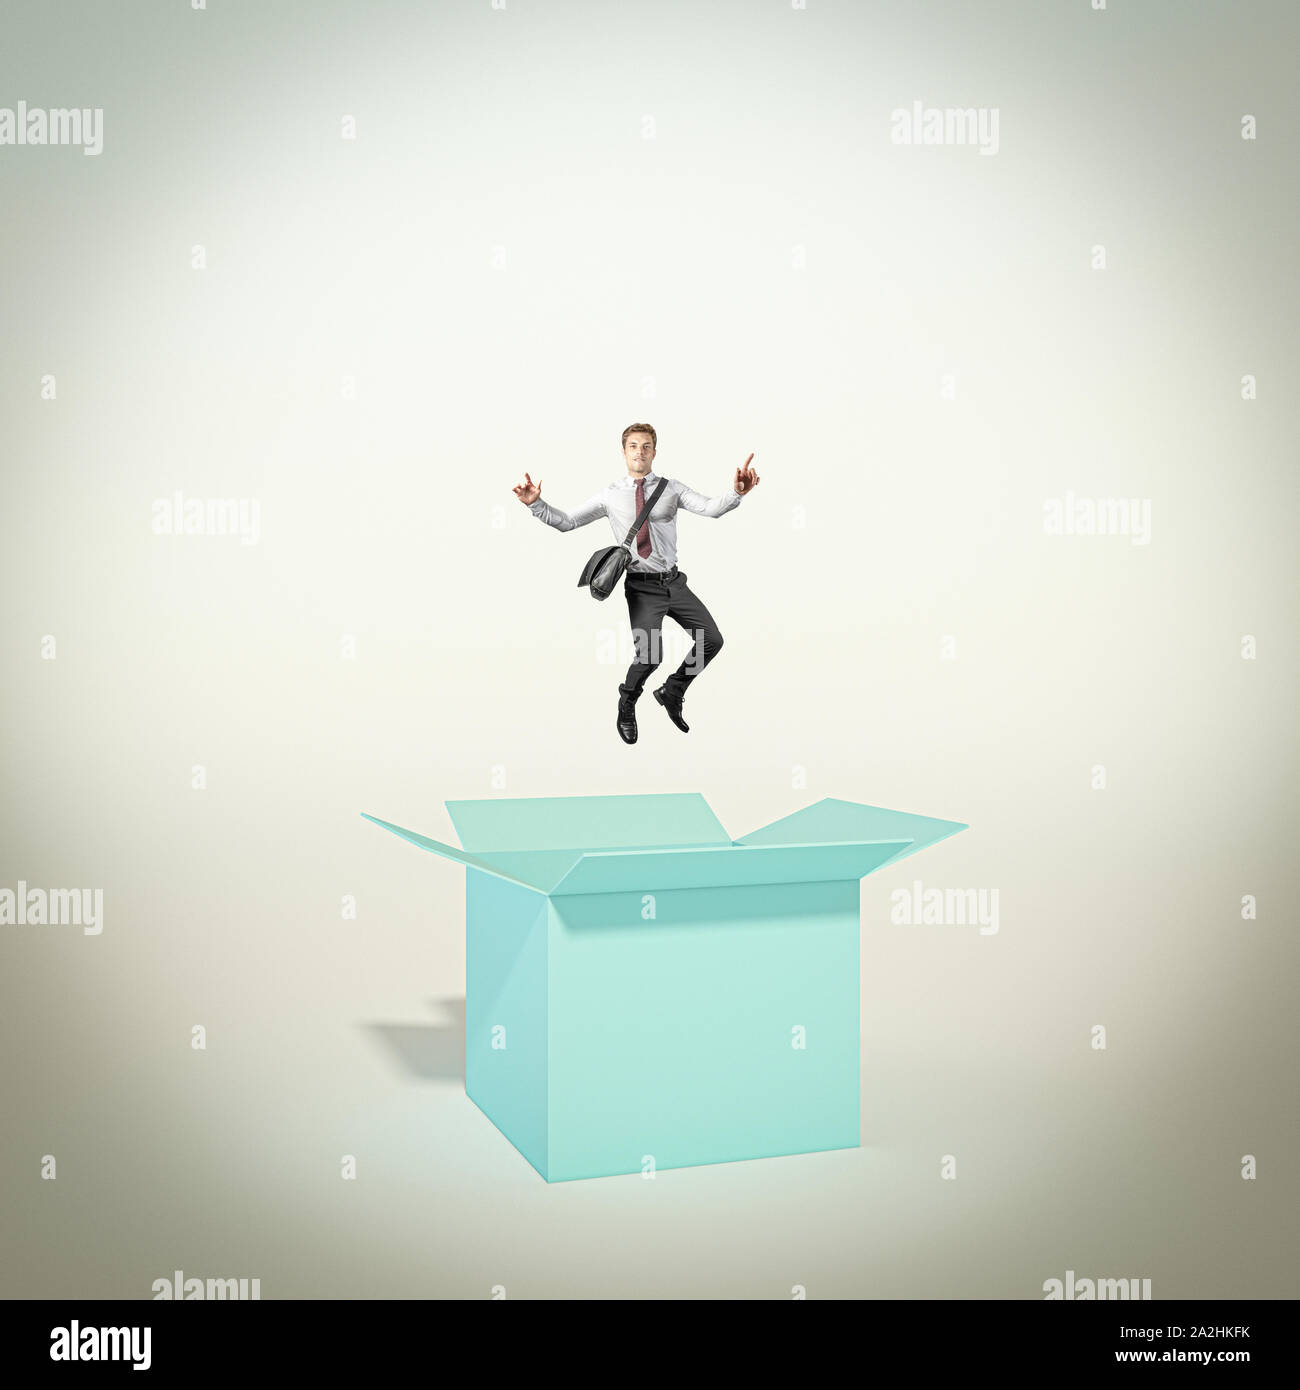 Happy and successful man jumps out of the box. concept of different and creative thinking. winning attitude. Stock Photo